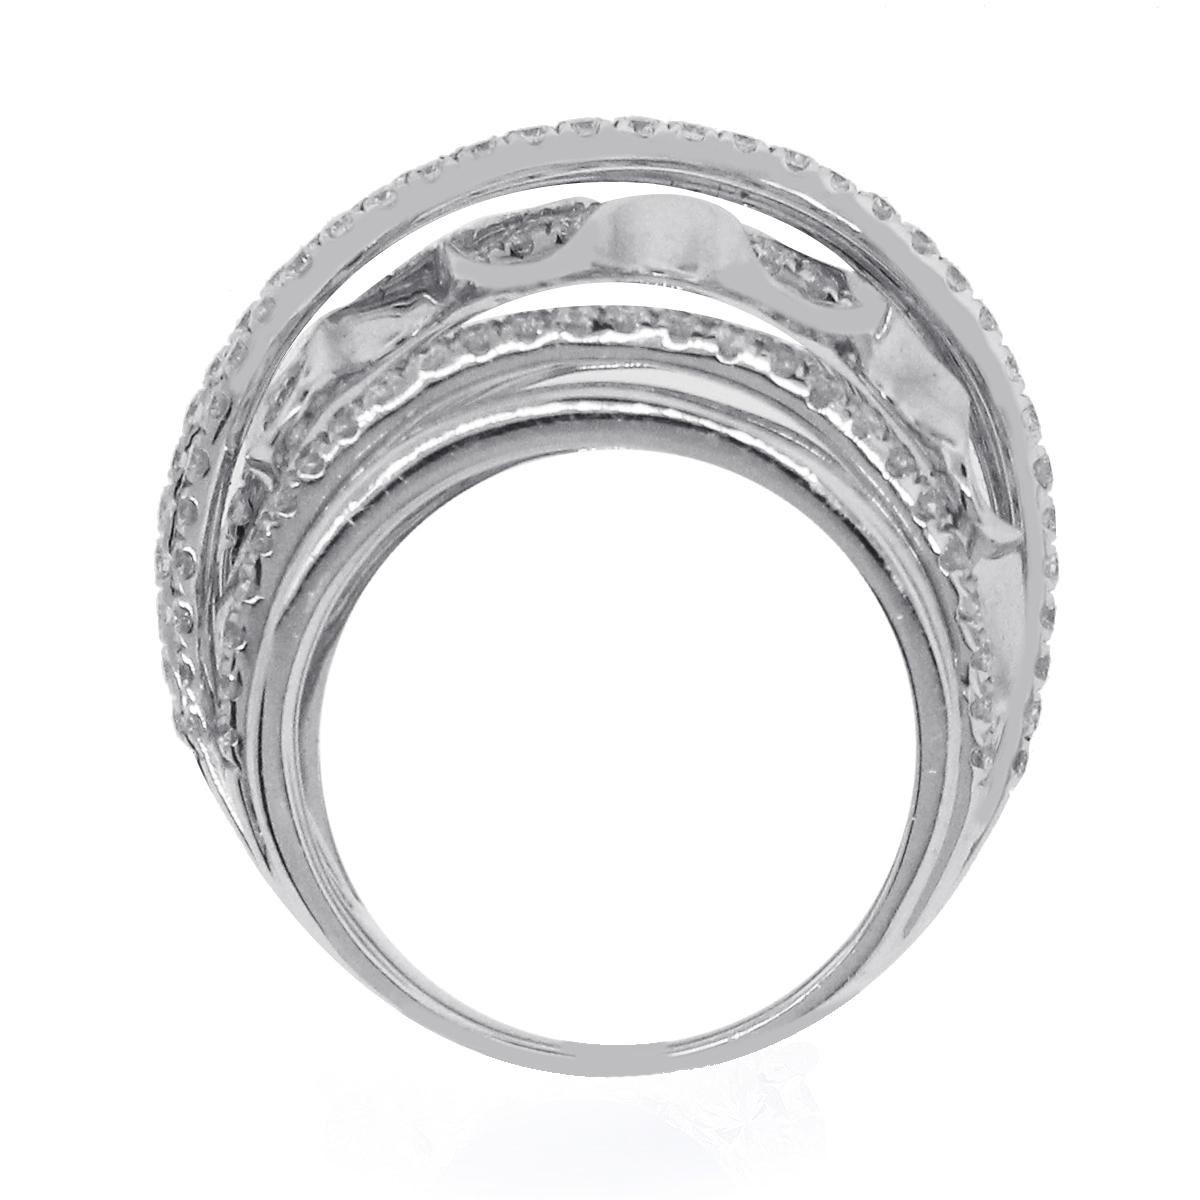 Material: 18k White Gold
Diamond Details: Approximately 1.56ctw diamonds. Diamonds are G/H in color and VS2-SI1 in clarity.
Ring Size: 7
Total Weight: 14.8g (9.5dwt)
Measurements: 1